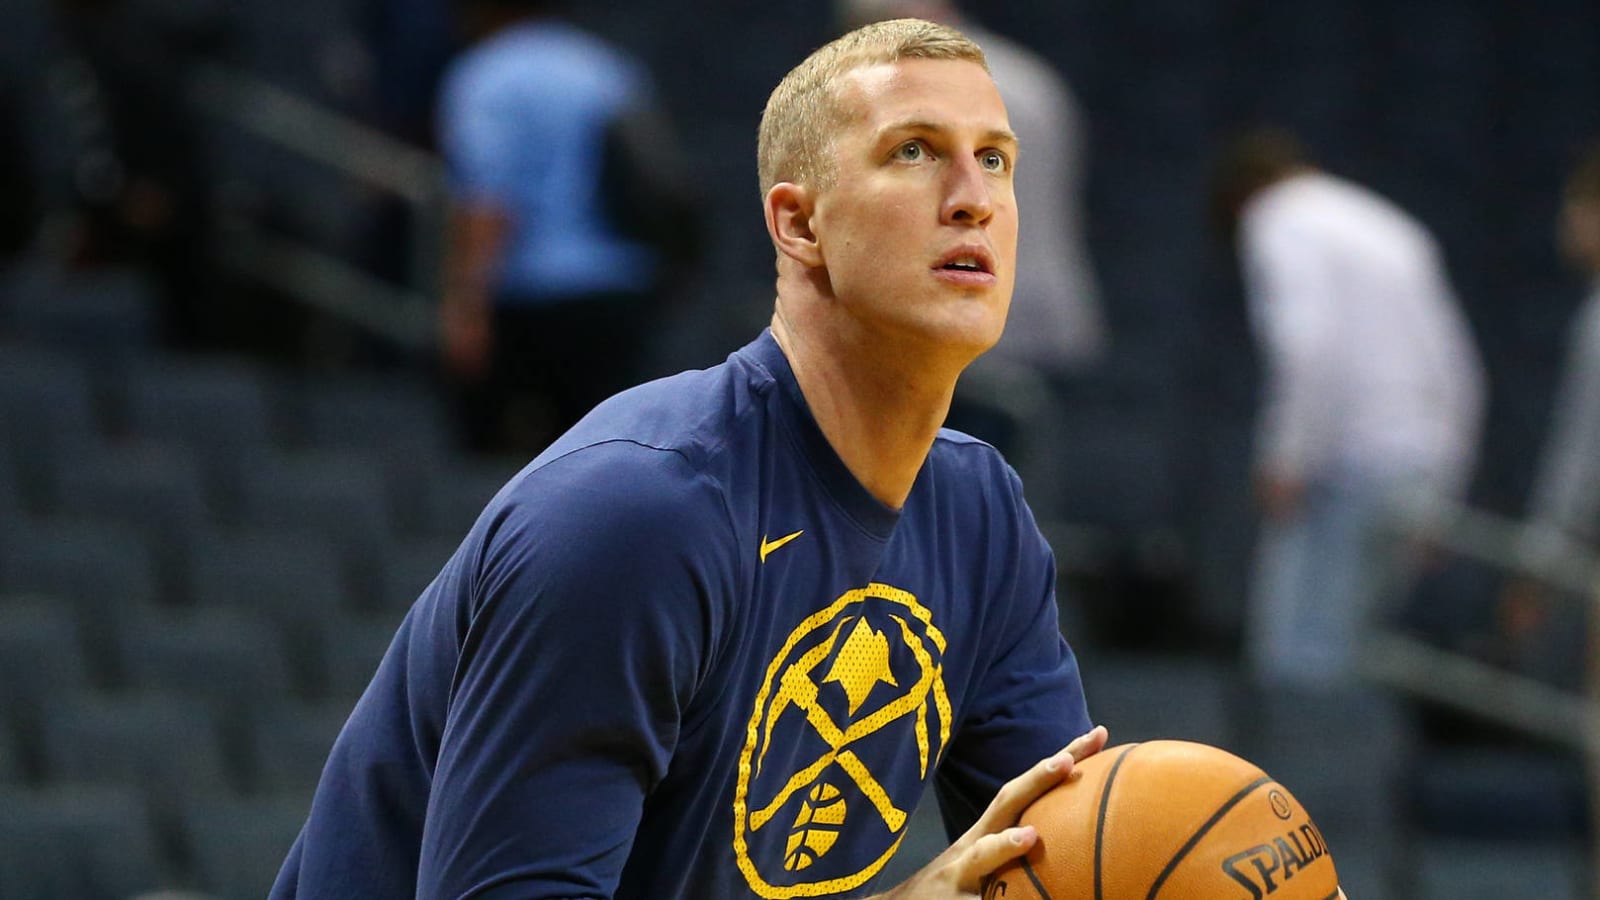 Pistons sign Mason Plumlee to three-year, $25M deal